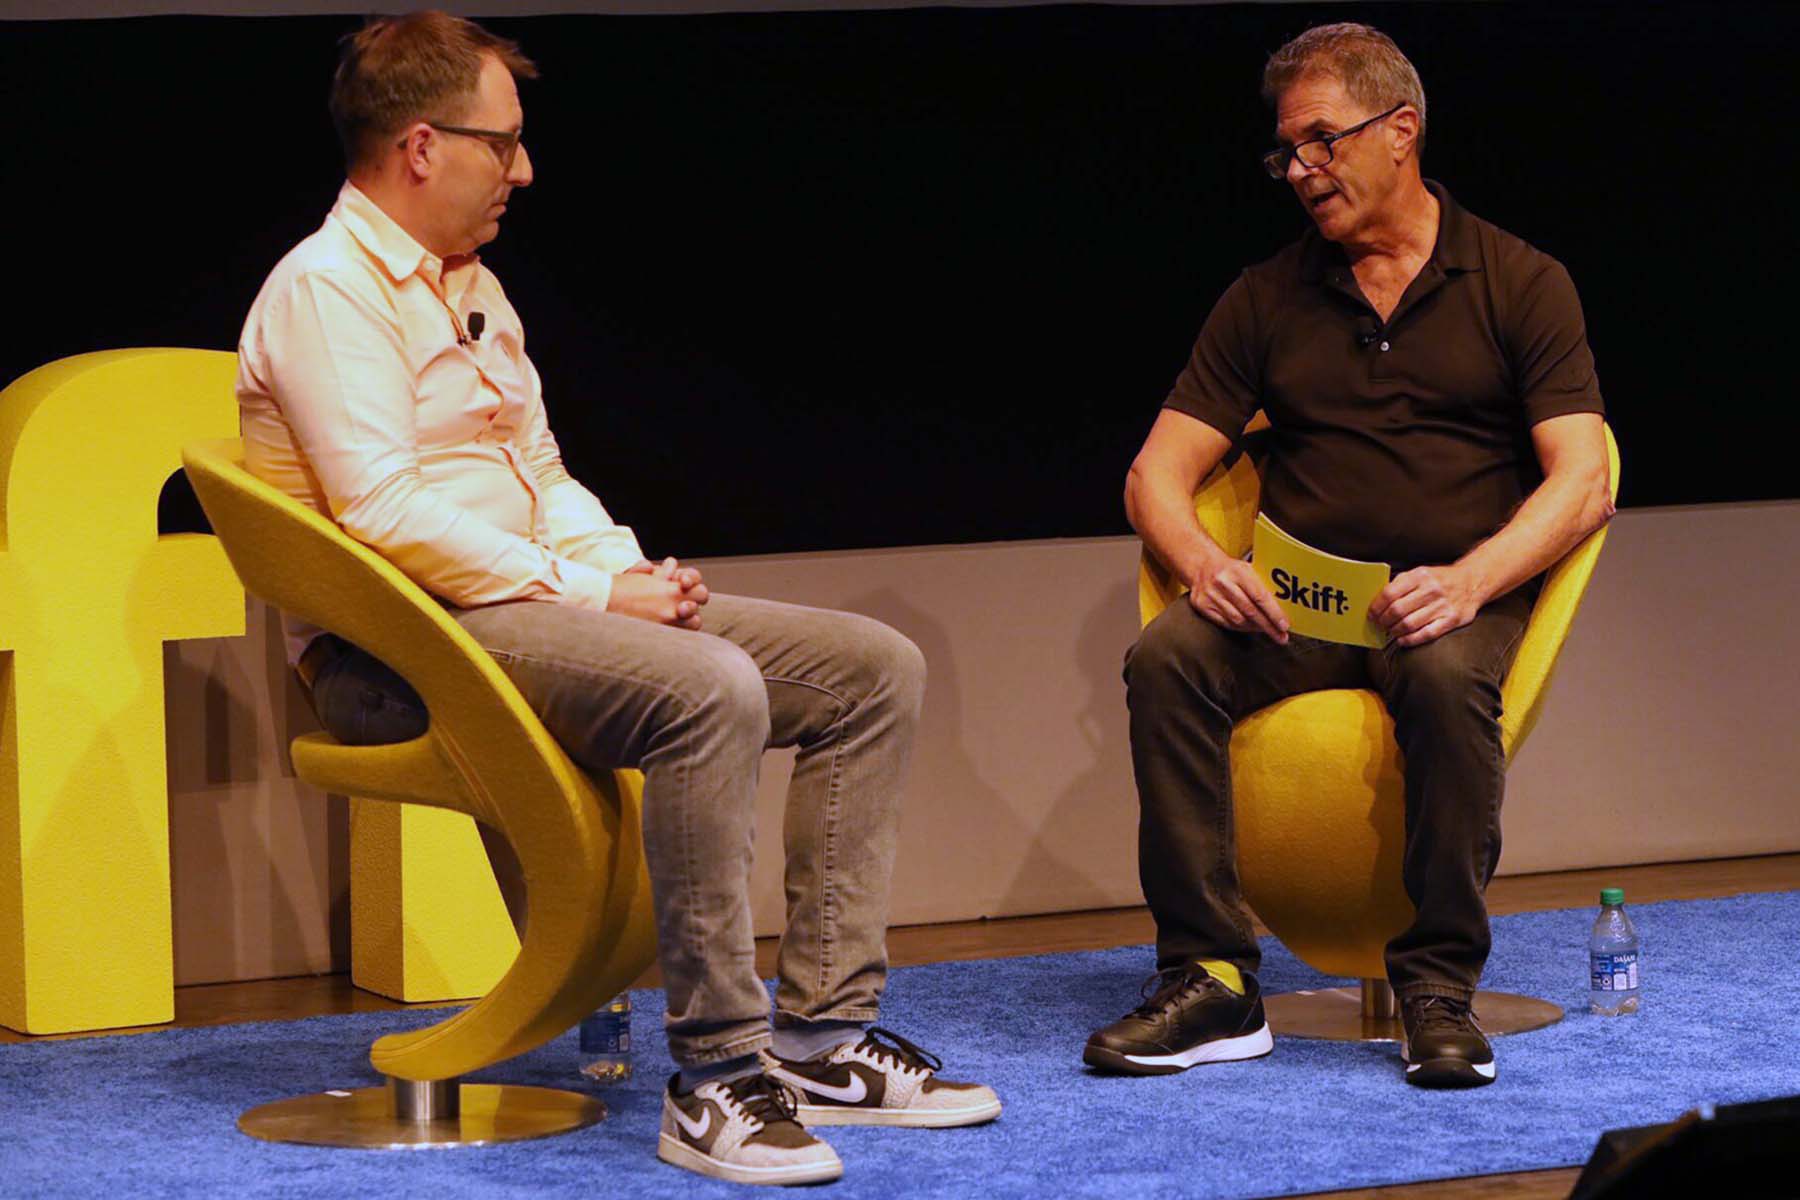 Pictured: Matthias Keller of Kayak, left, in discussion with Skift executive editor Dennis Schaal.